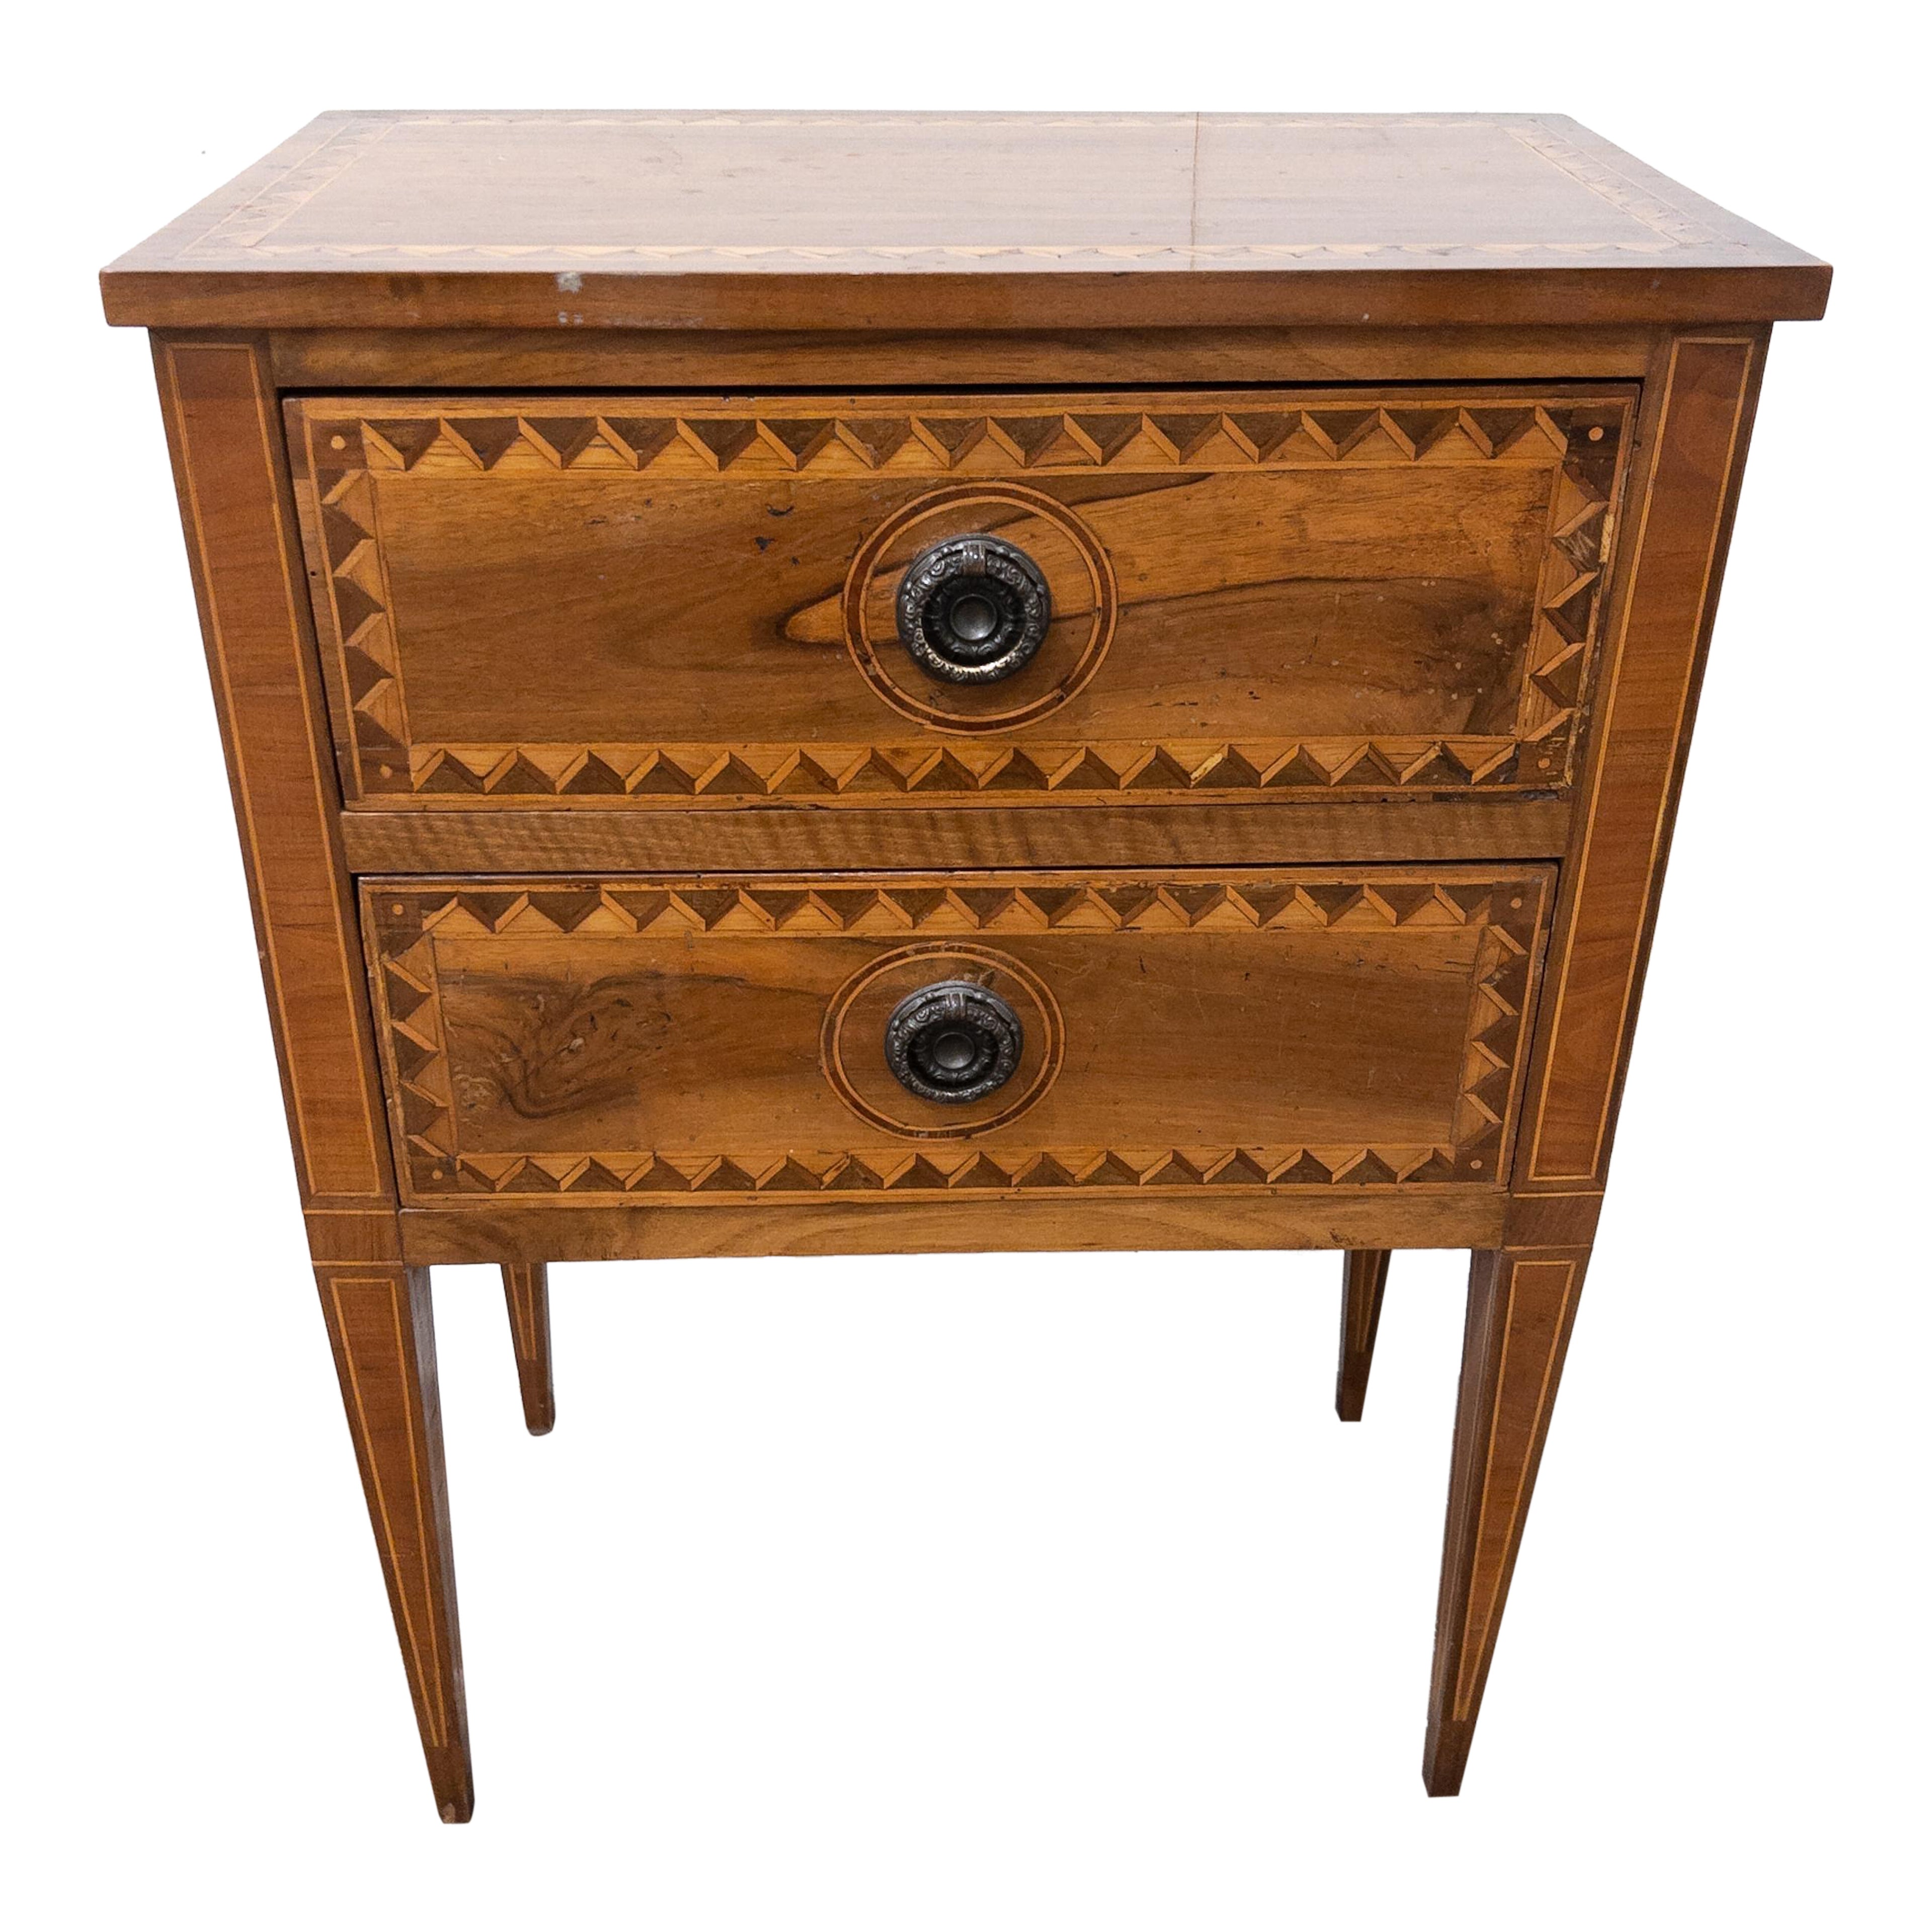 19th Century Two Drawer Small Fruitwood Commode with Marquetry Detail For Sale